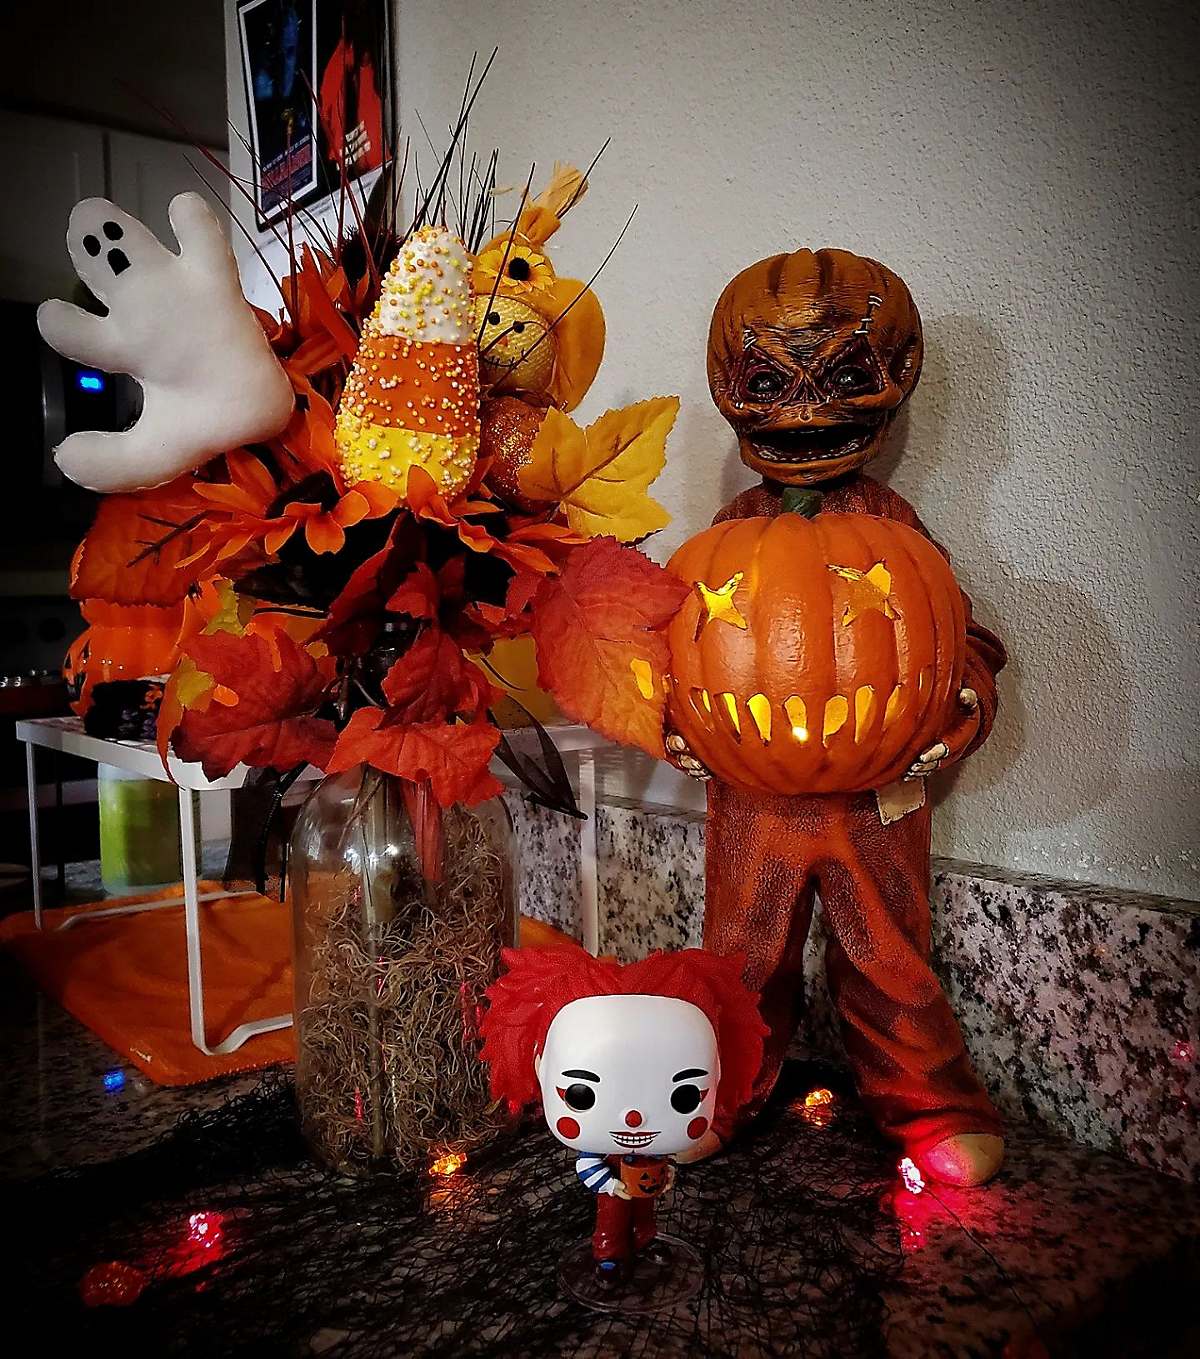 Chuckles the Clown figure and light-up pumpkin and Halloween and fall bouquet